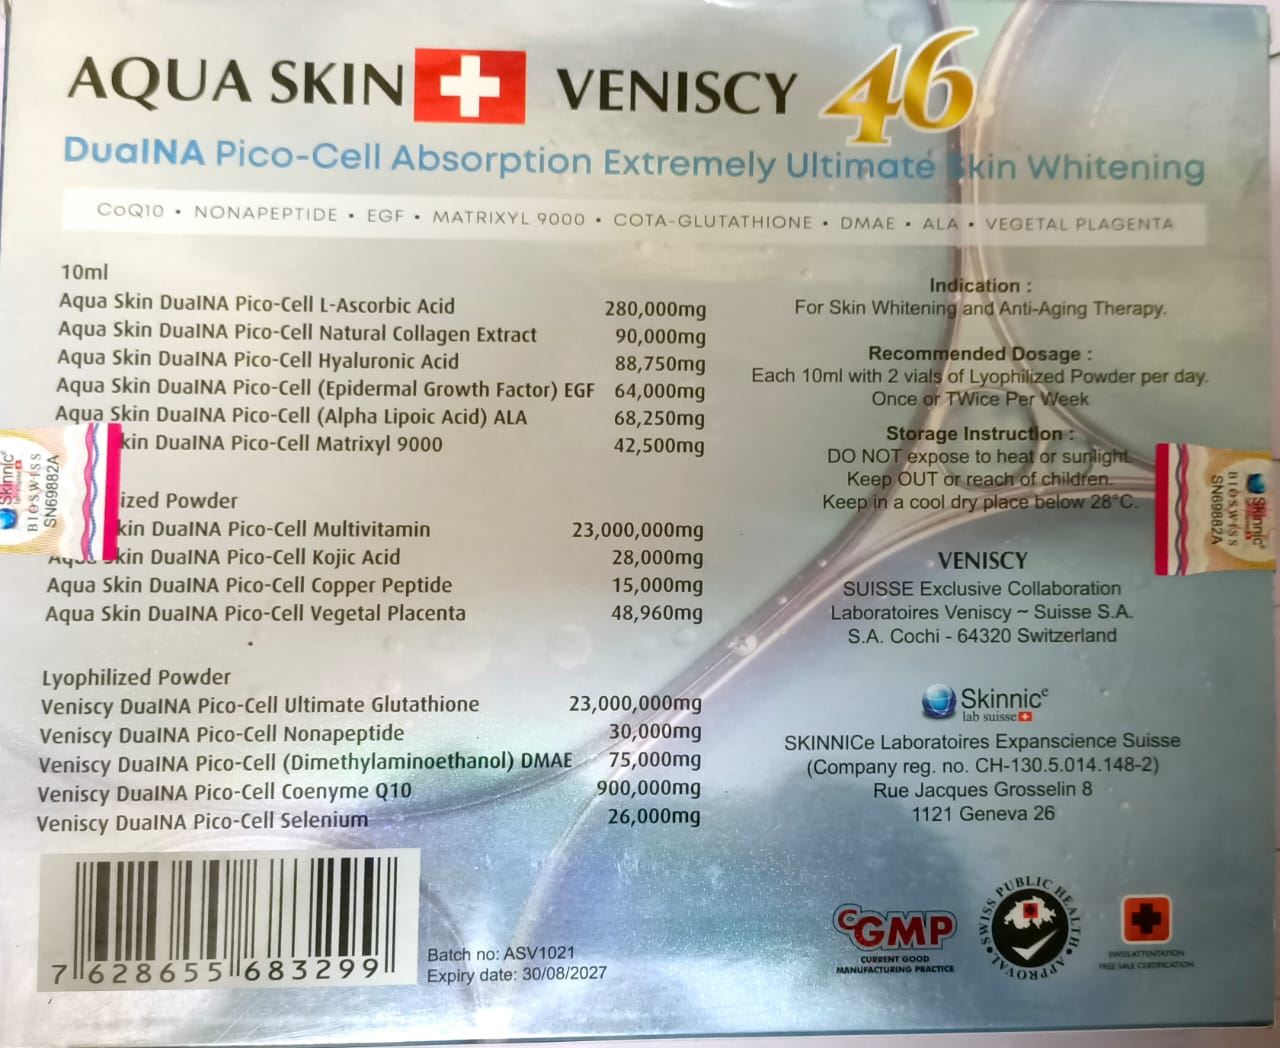 NEW!! AQUA SKIN VENISCY 46 (SWISS) DUALNA PICO-CELL ABSORPTION EXTREMELY ULTIMATE SKIN WHITENING INJECTION by "www.ccthaitown.com"